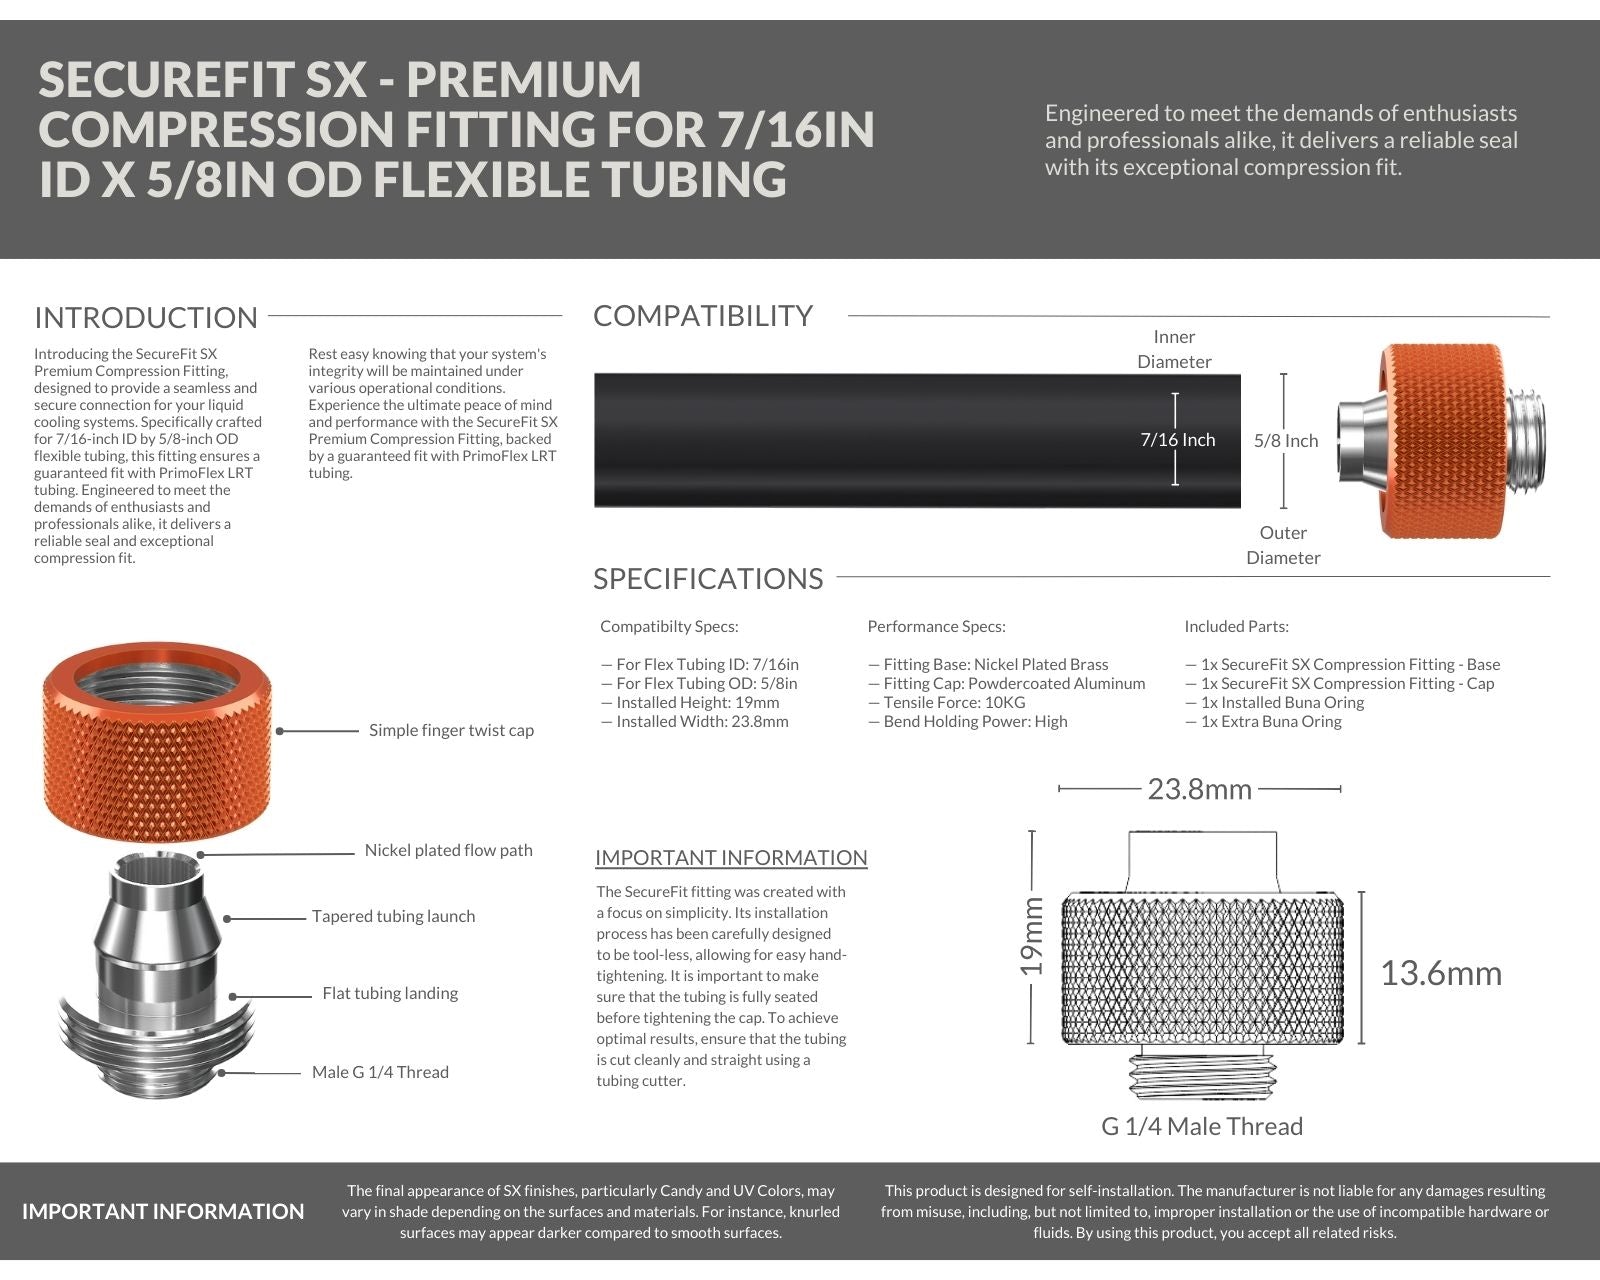 PrimoChill SecureFit SX - Premium Compression Fitting For 7/16in ID x 5/8in OD Flexible Tubing (F-SFSX758) - Available in 20+ Colors, Custom Watercooling Loop Ready - Candy Copper